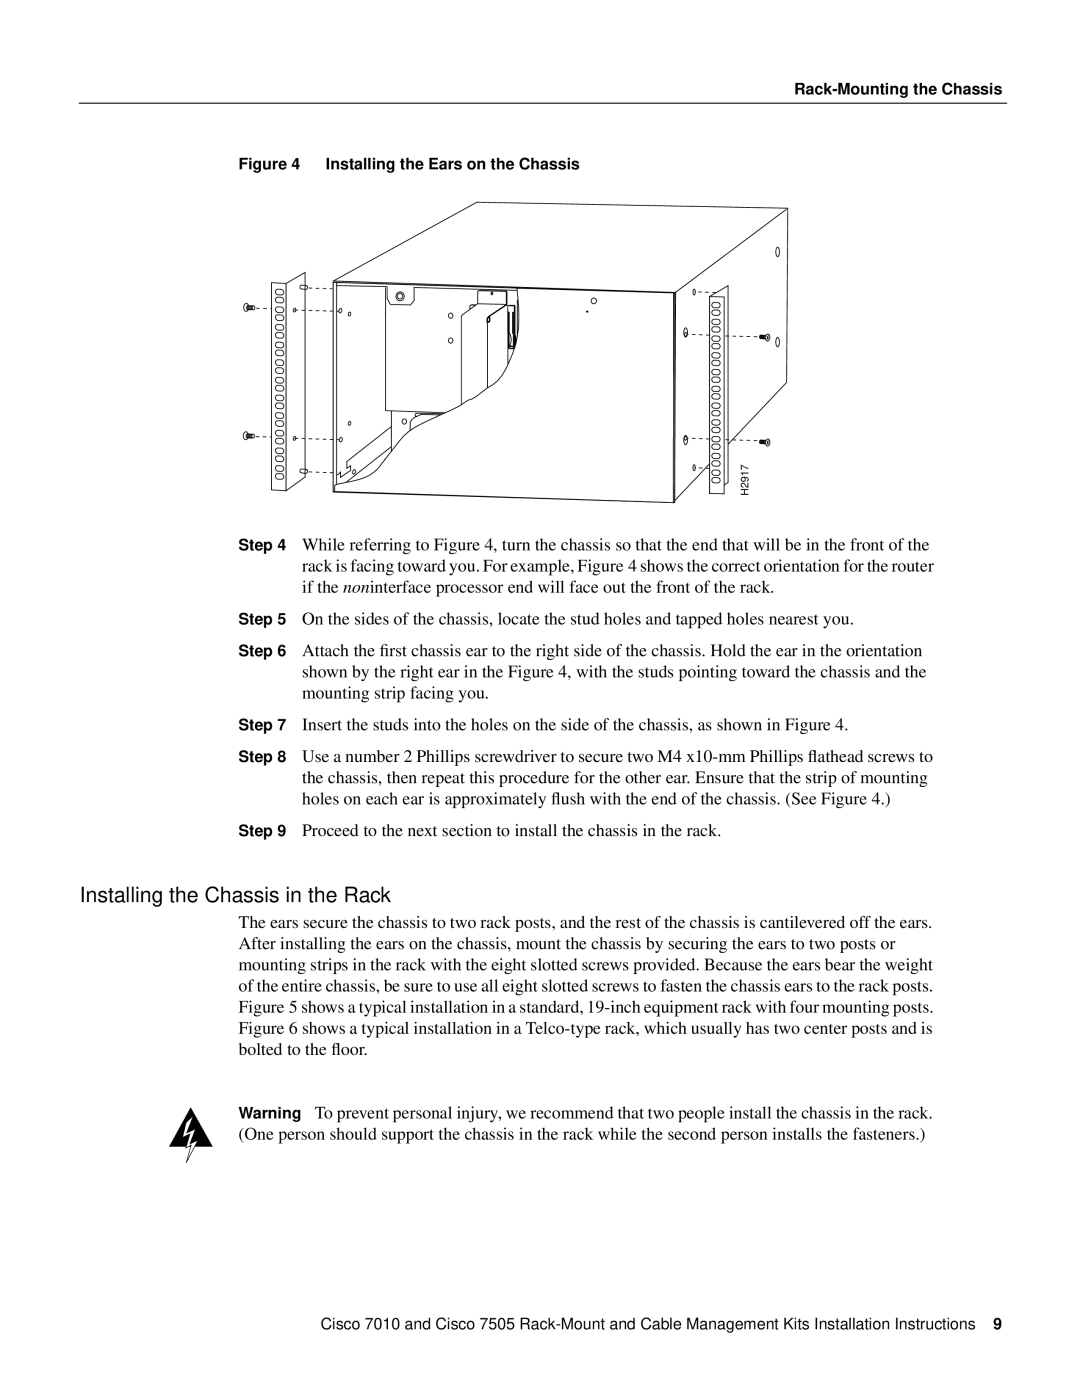 Cisco Systems Cisco 7505/7010 installation instructions Installing the Chassis in the Rack 